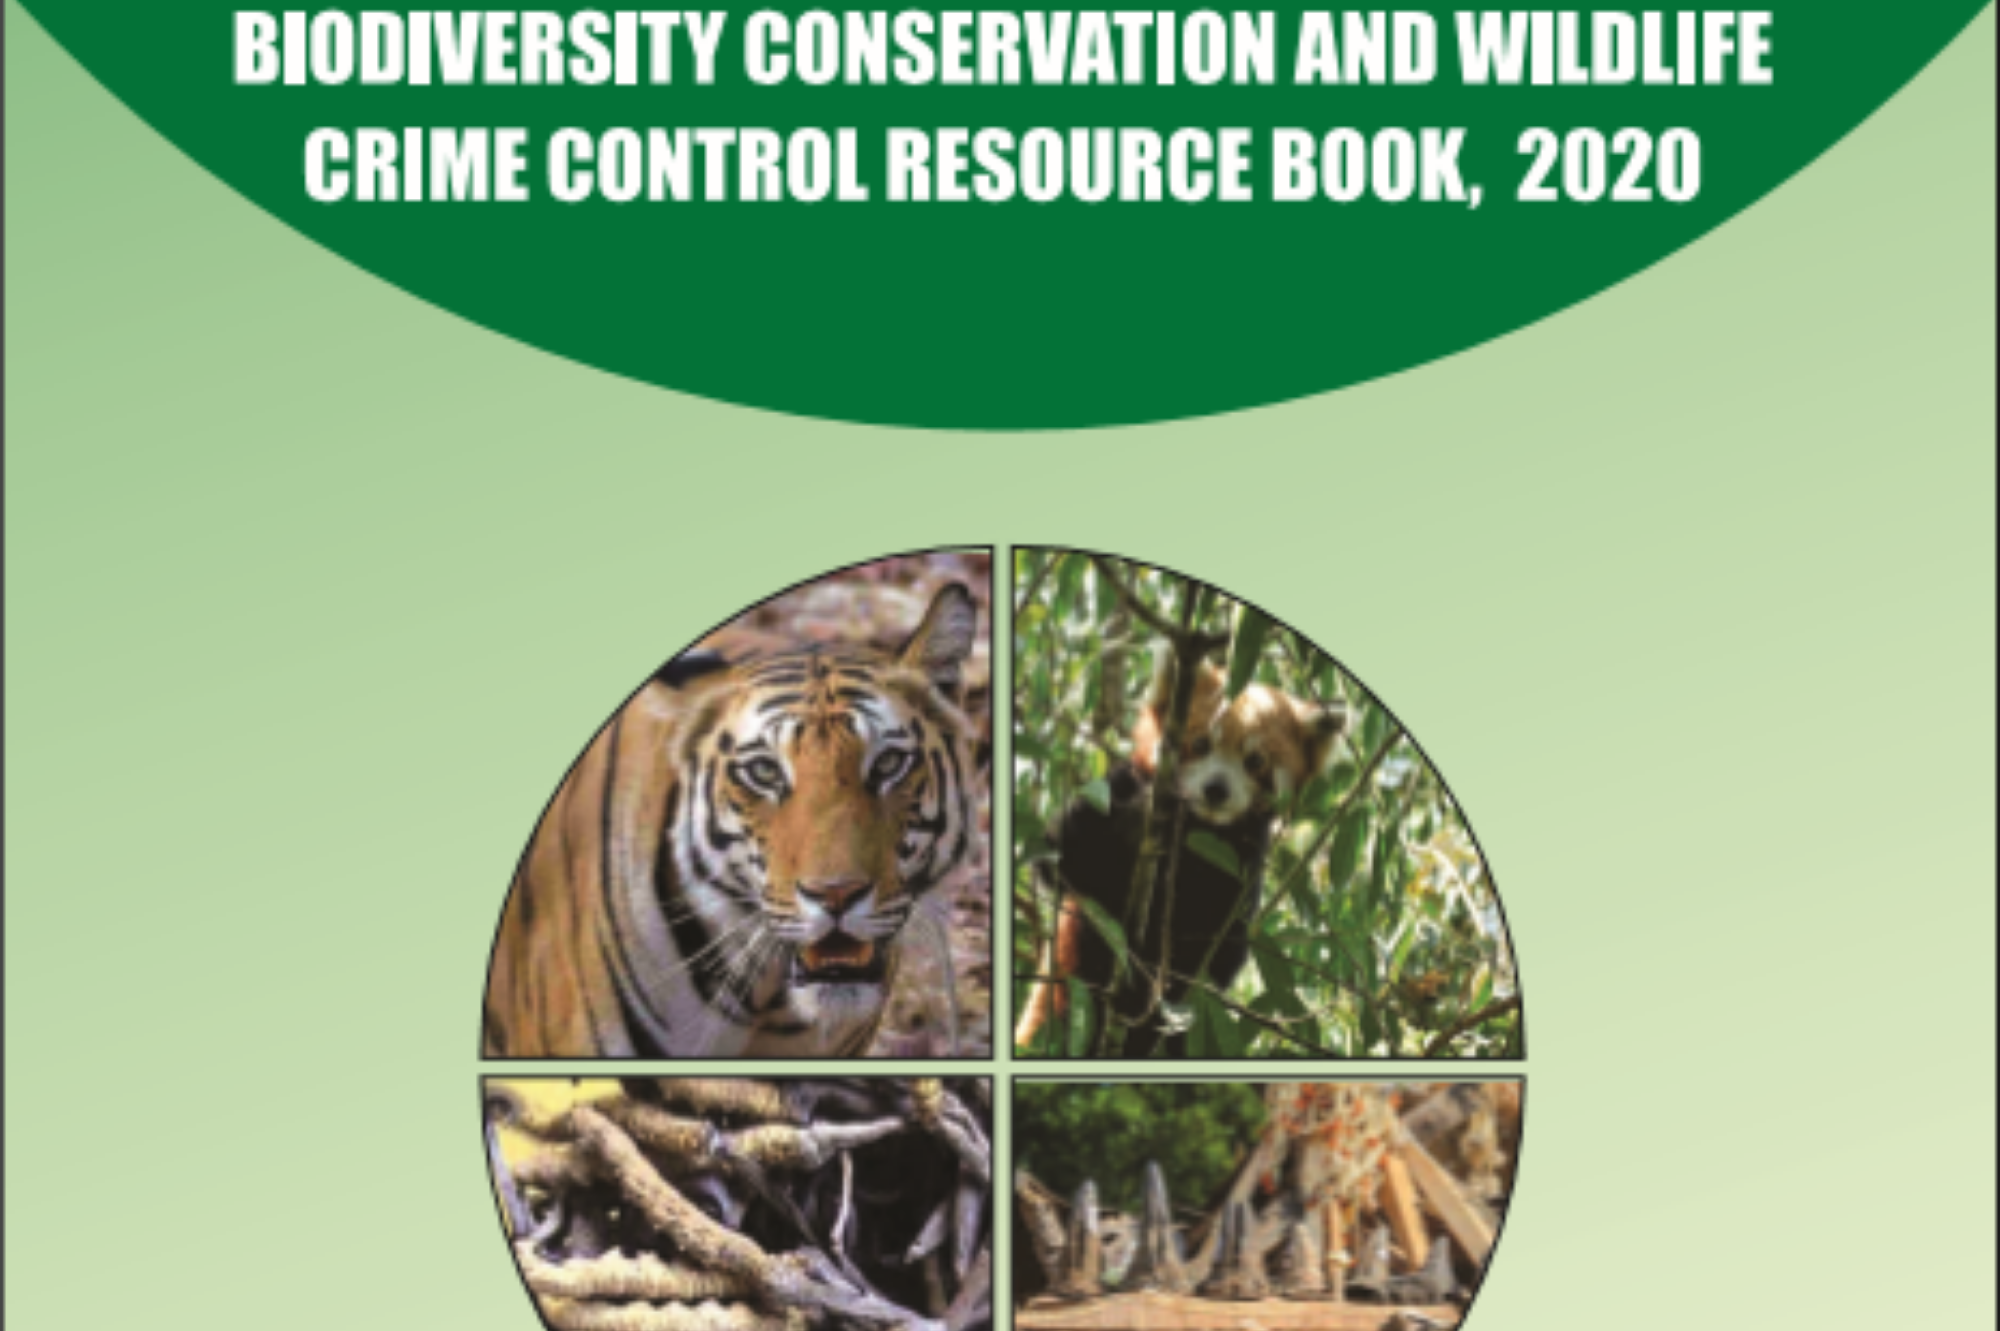 Biodiversity Conservation and Wildlife Crime Control Resource Book, 2020